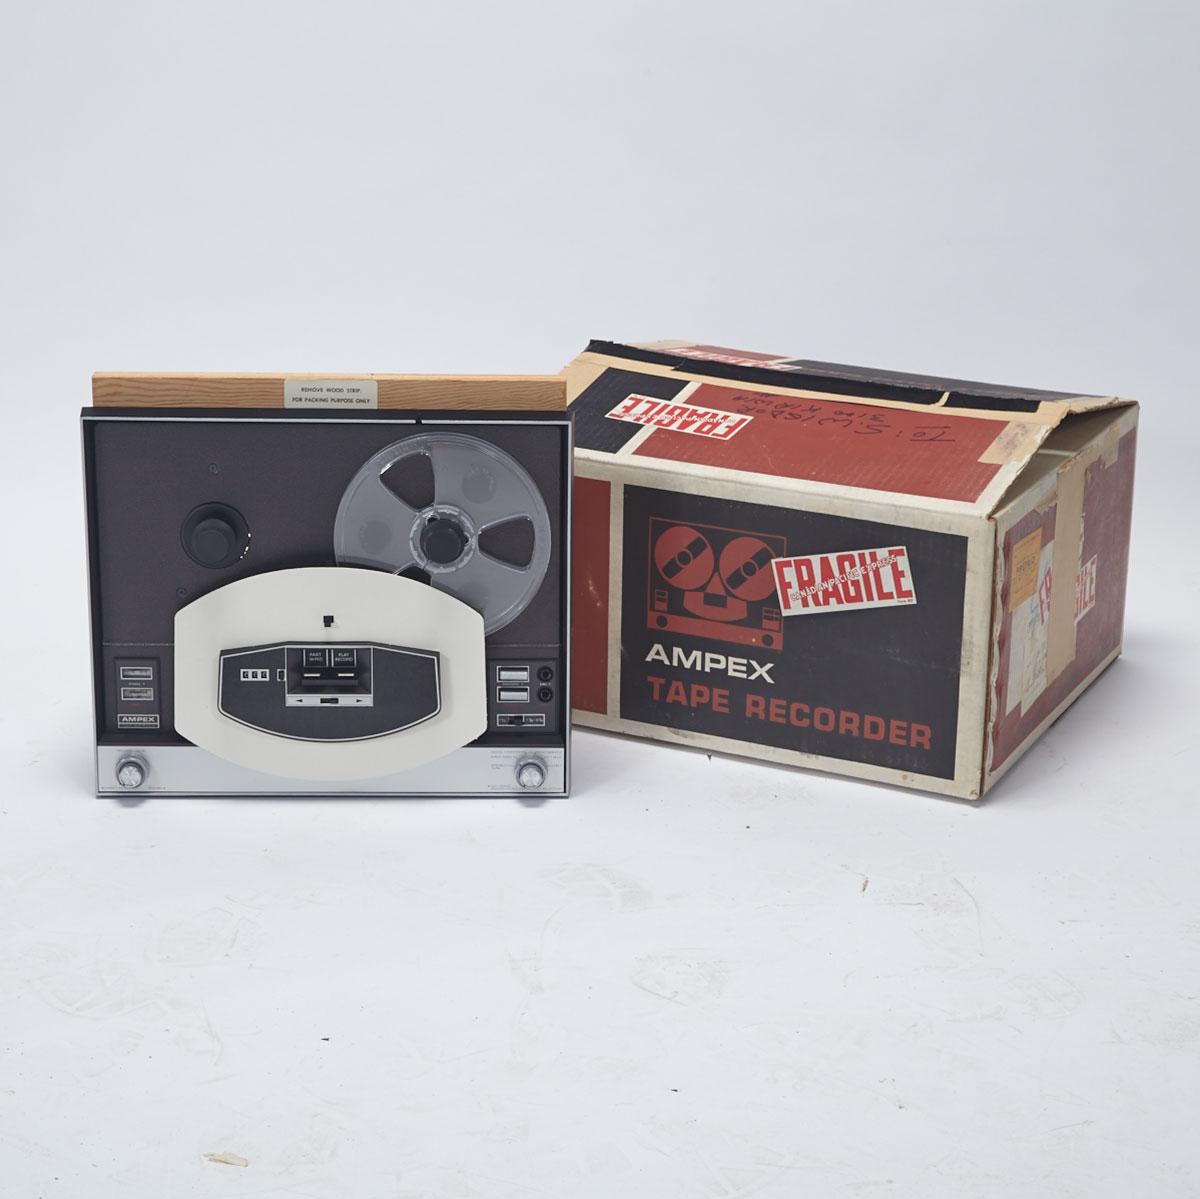 [New Old Stock] Ampex 3-Speed Deck Model 750 Reel-to-Reel Tape Recorder, c.1968